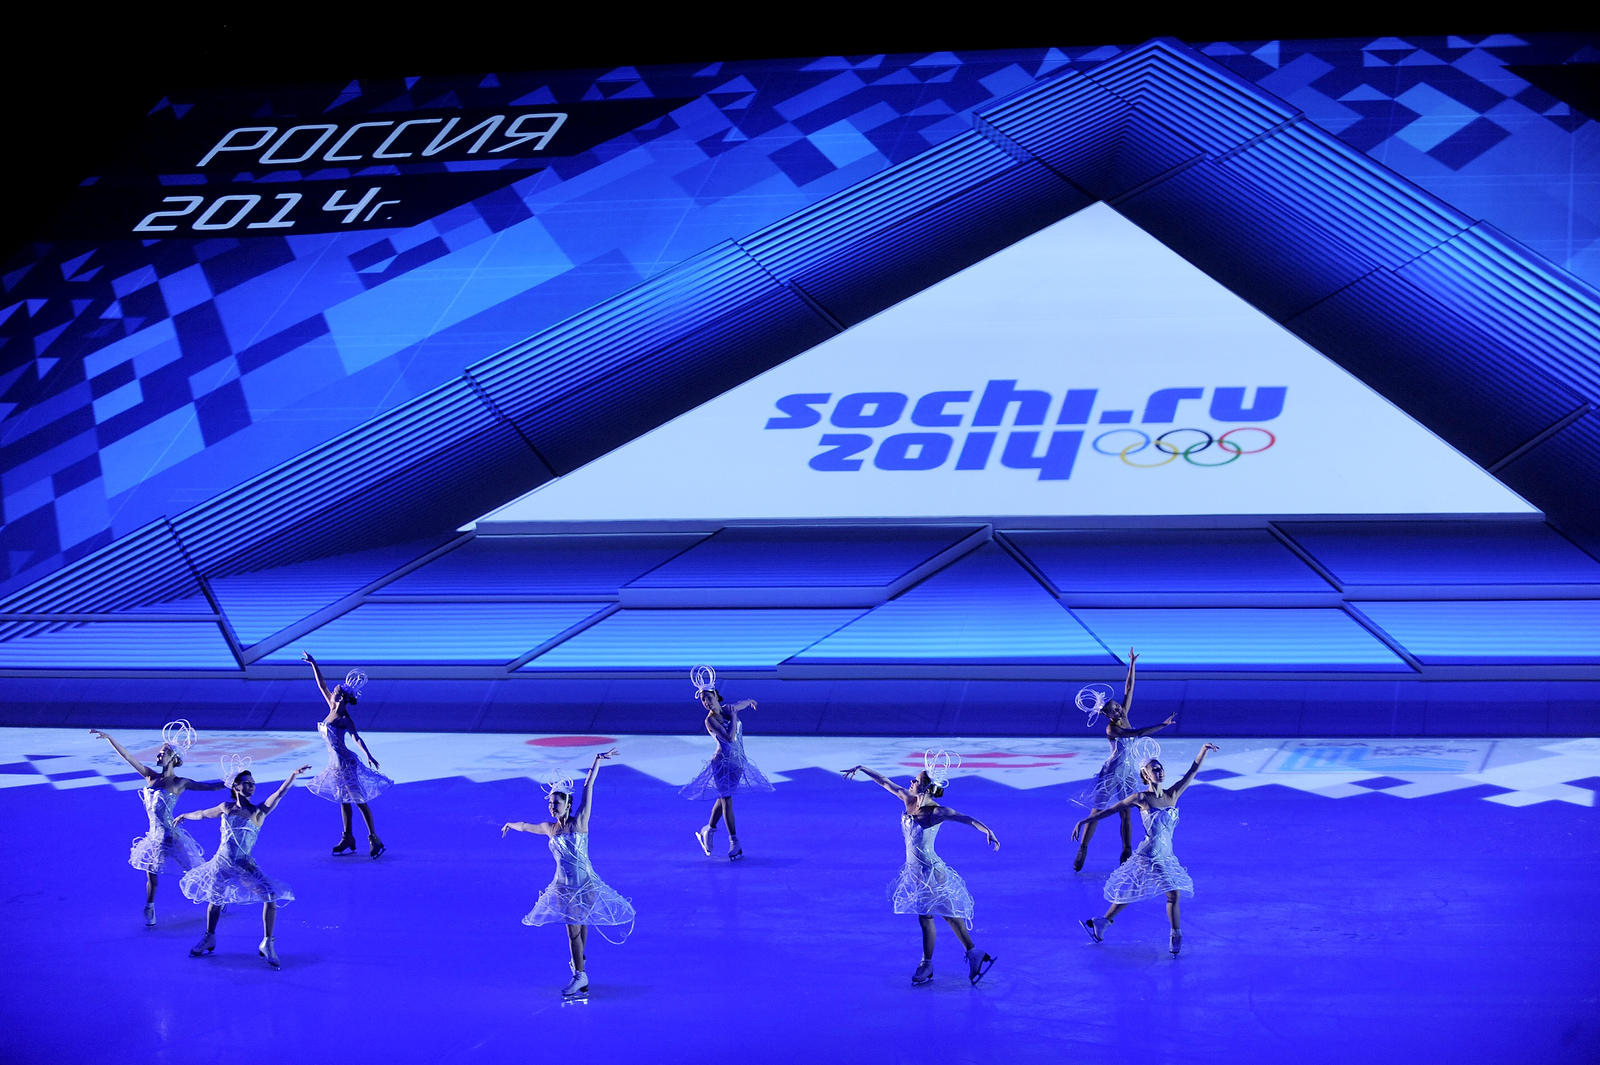 On July 4, 2007, Sochi was announced as the host city of the 2014 Winter Games.